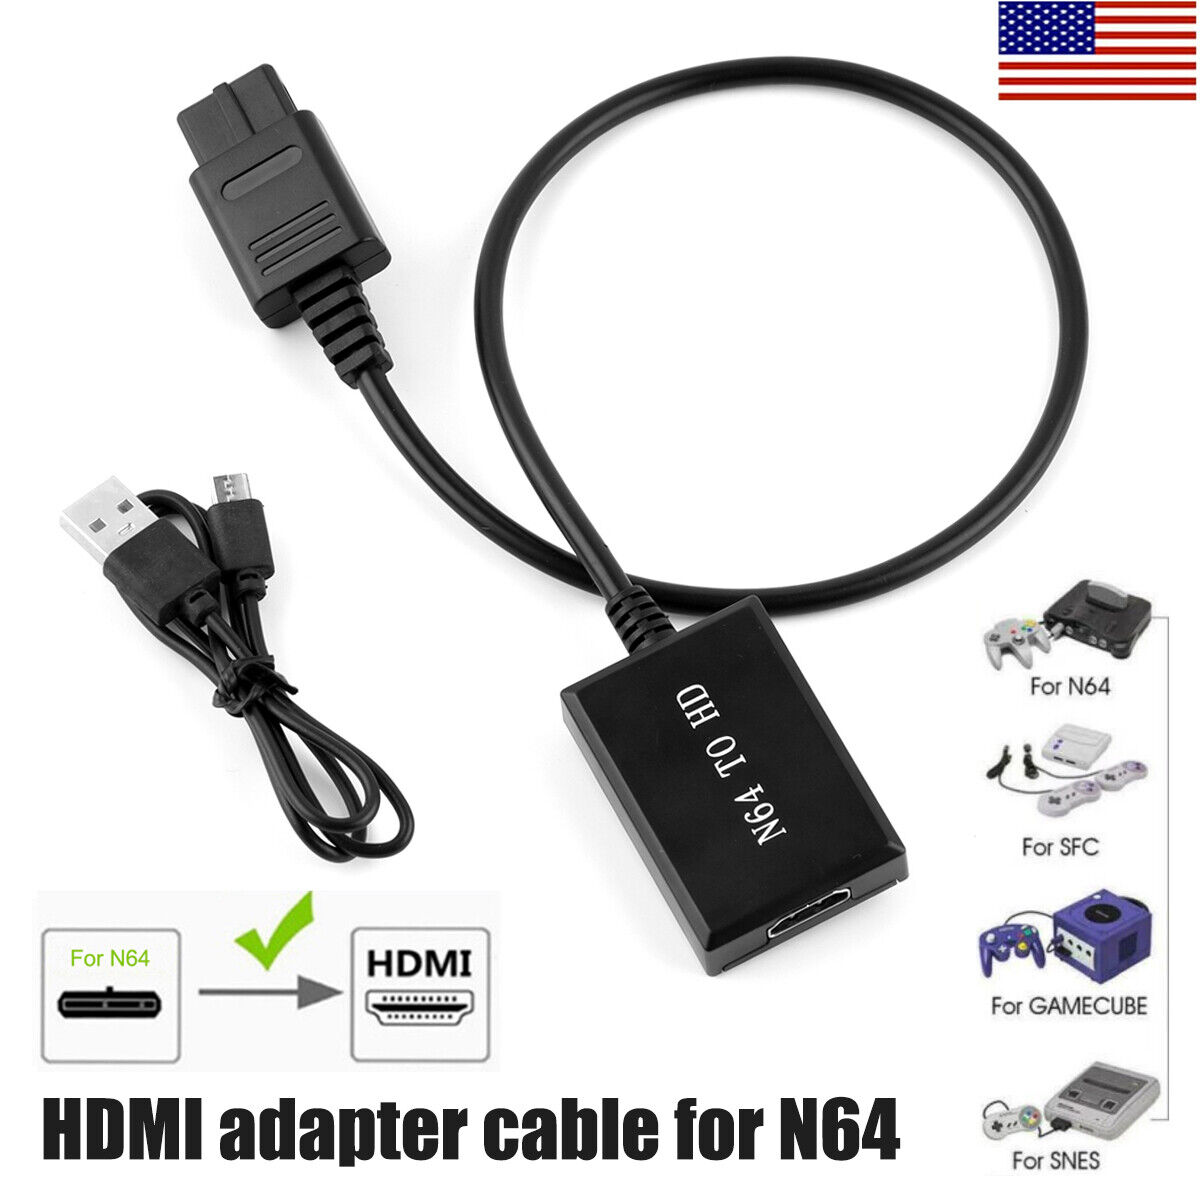 For Nintendo NES/SNES N64 Gamecube To HDMI Adapter Converter Cable USB Power | eBay